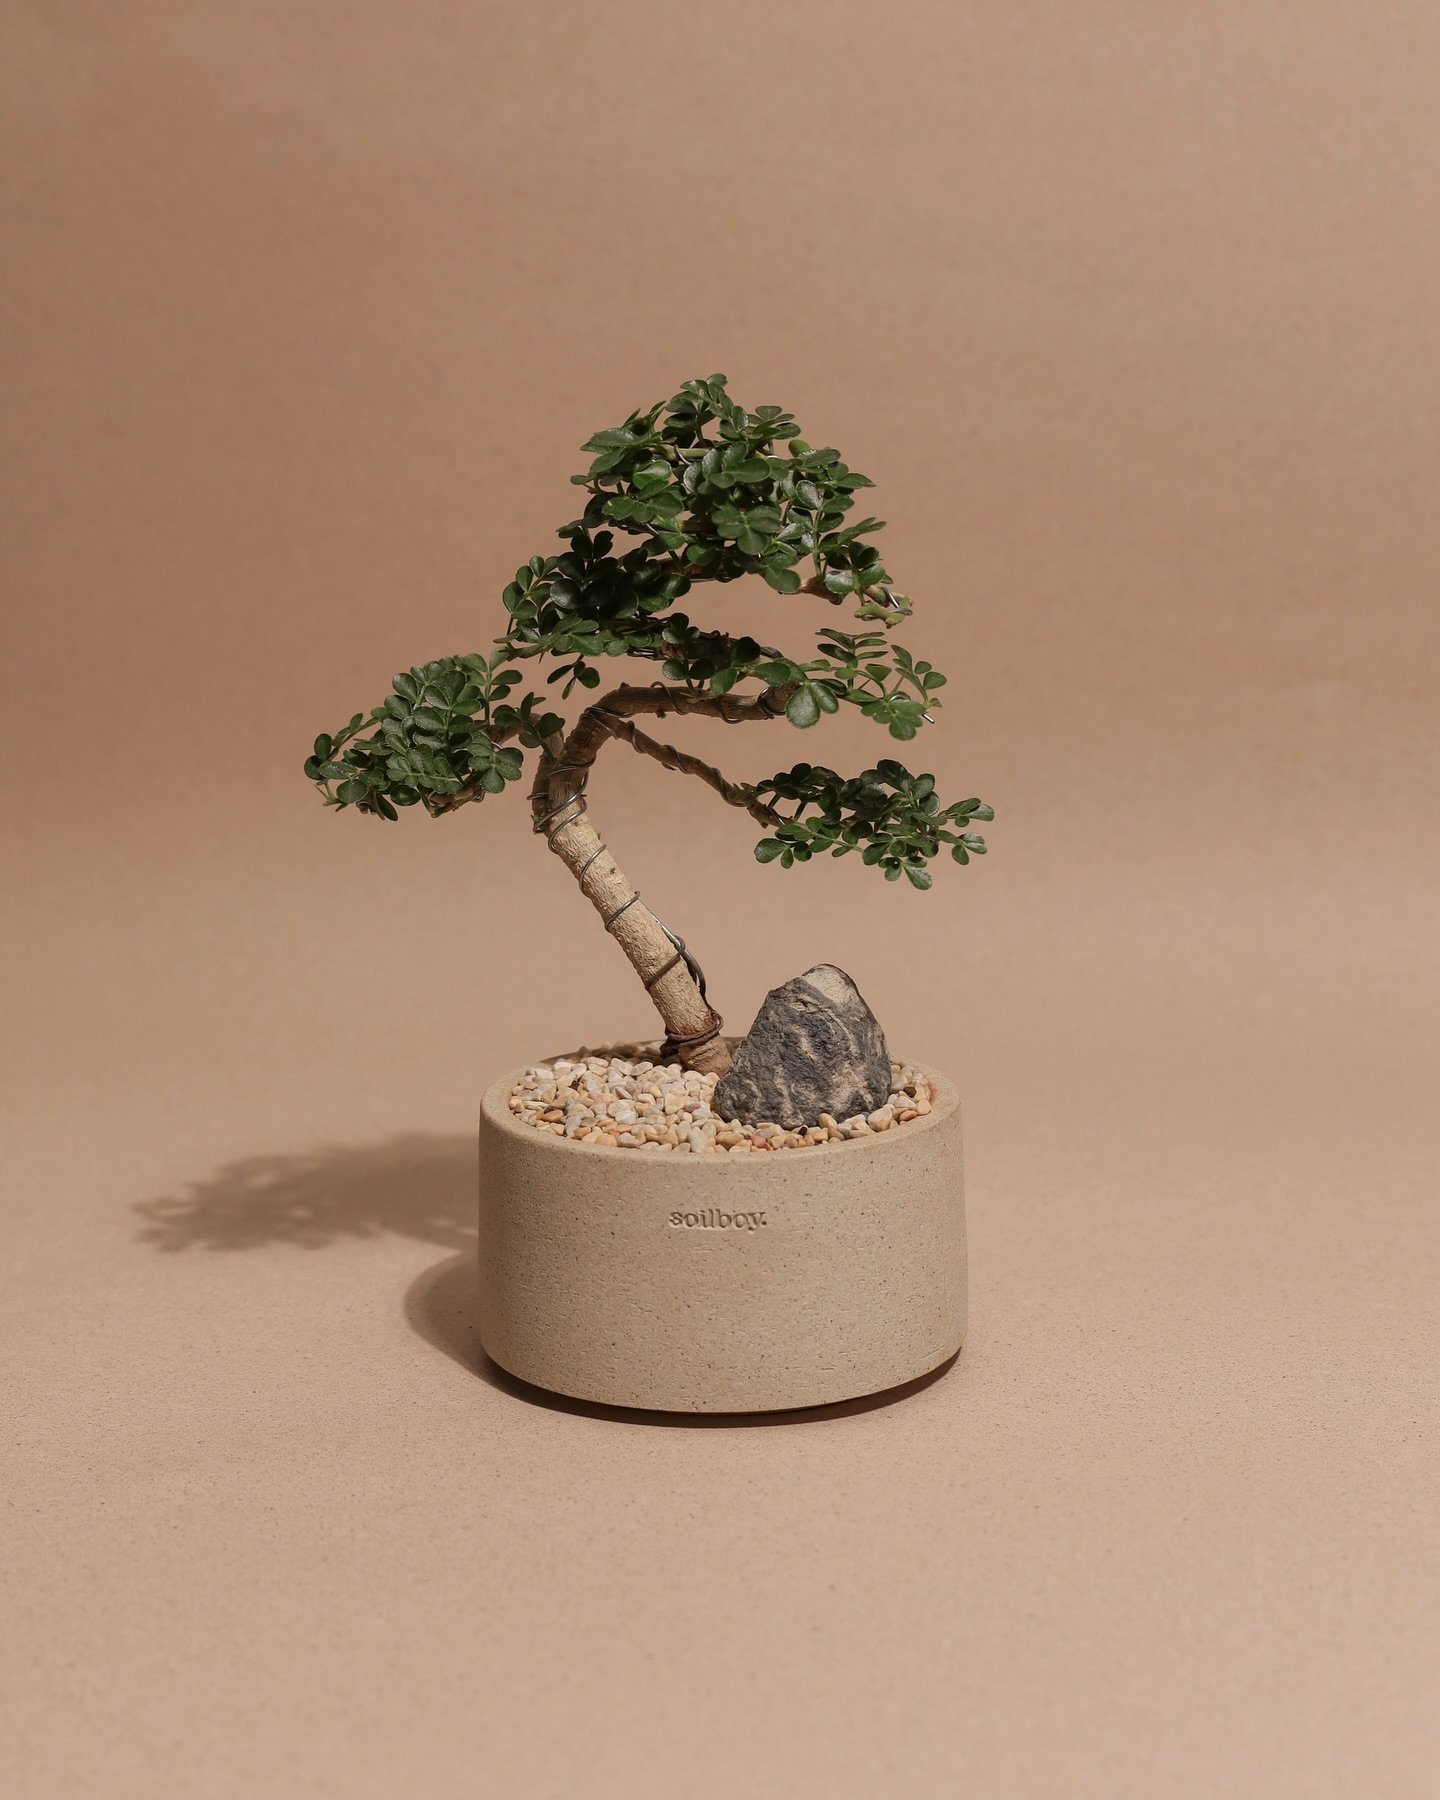 Feroniella Bonsai, it is one of the easiest to maintain in our bonsai series. With slow but steady growth, it&rsquo;s essential to prune frequently to keep its leaves small. 

Now available online and in store. 

Potted in Soilboy Flat Planter
Handma